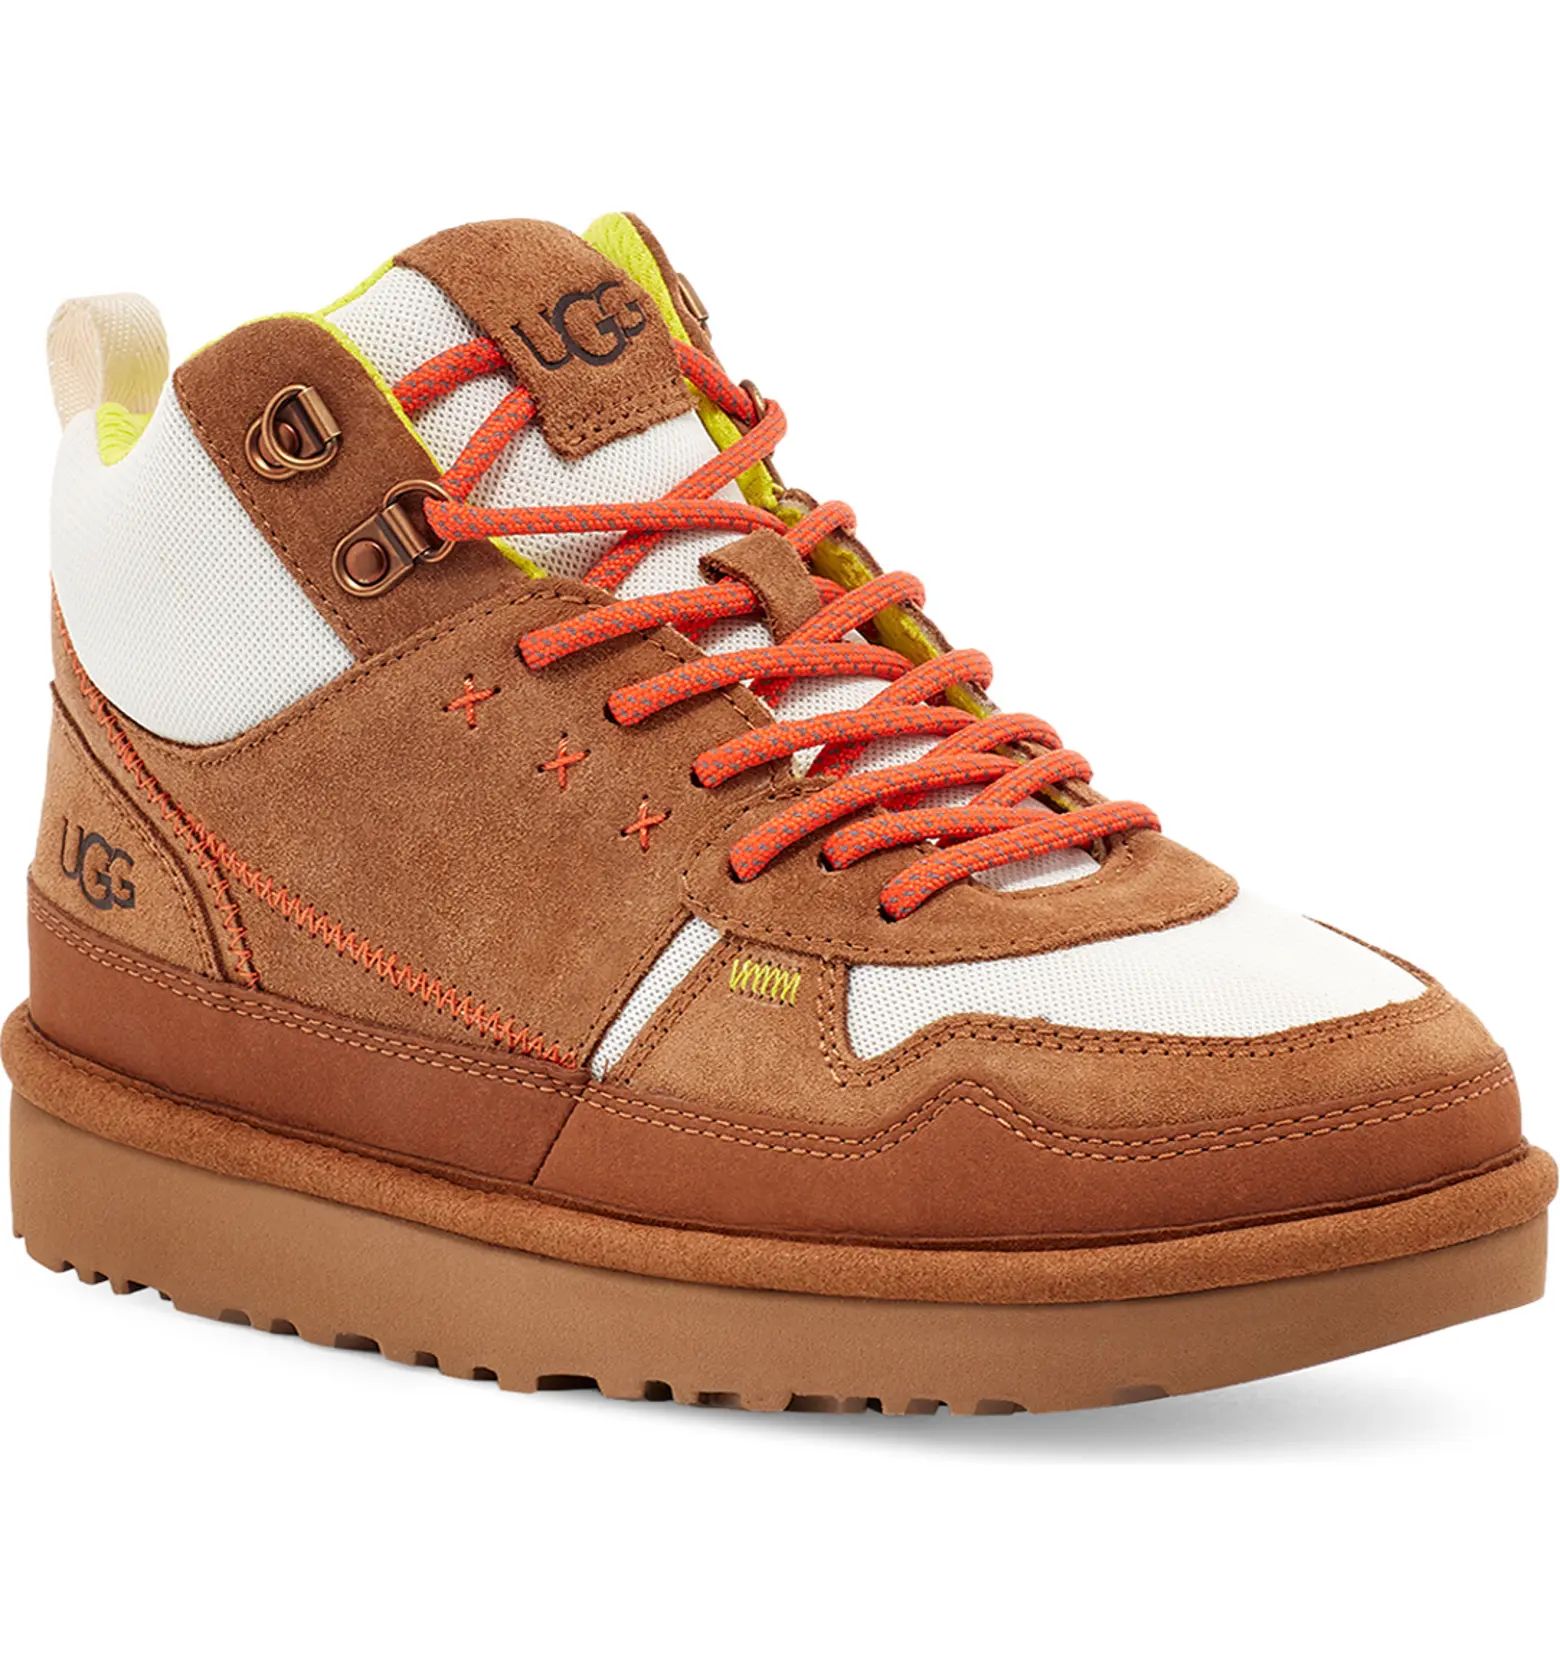 Highland High Top Heritage Hiking Boot (Women) | Nordstrom